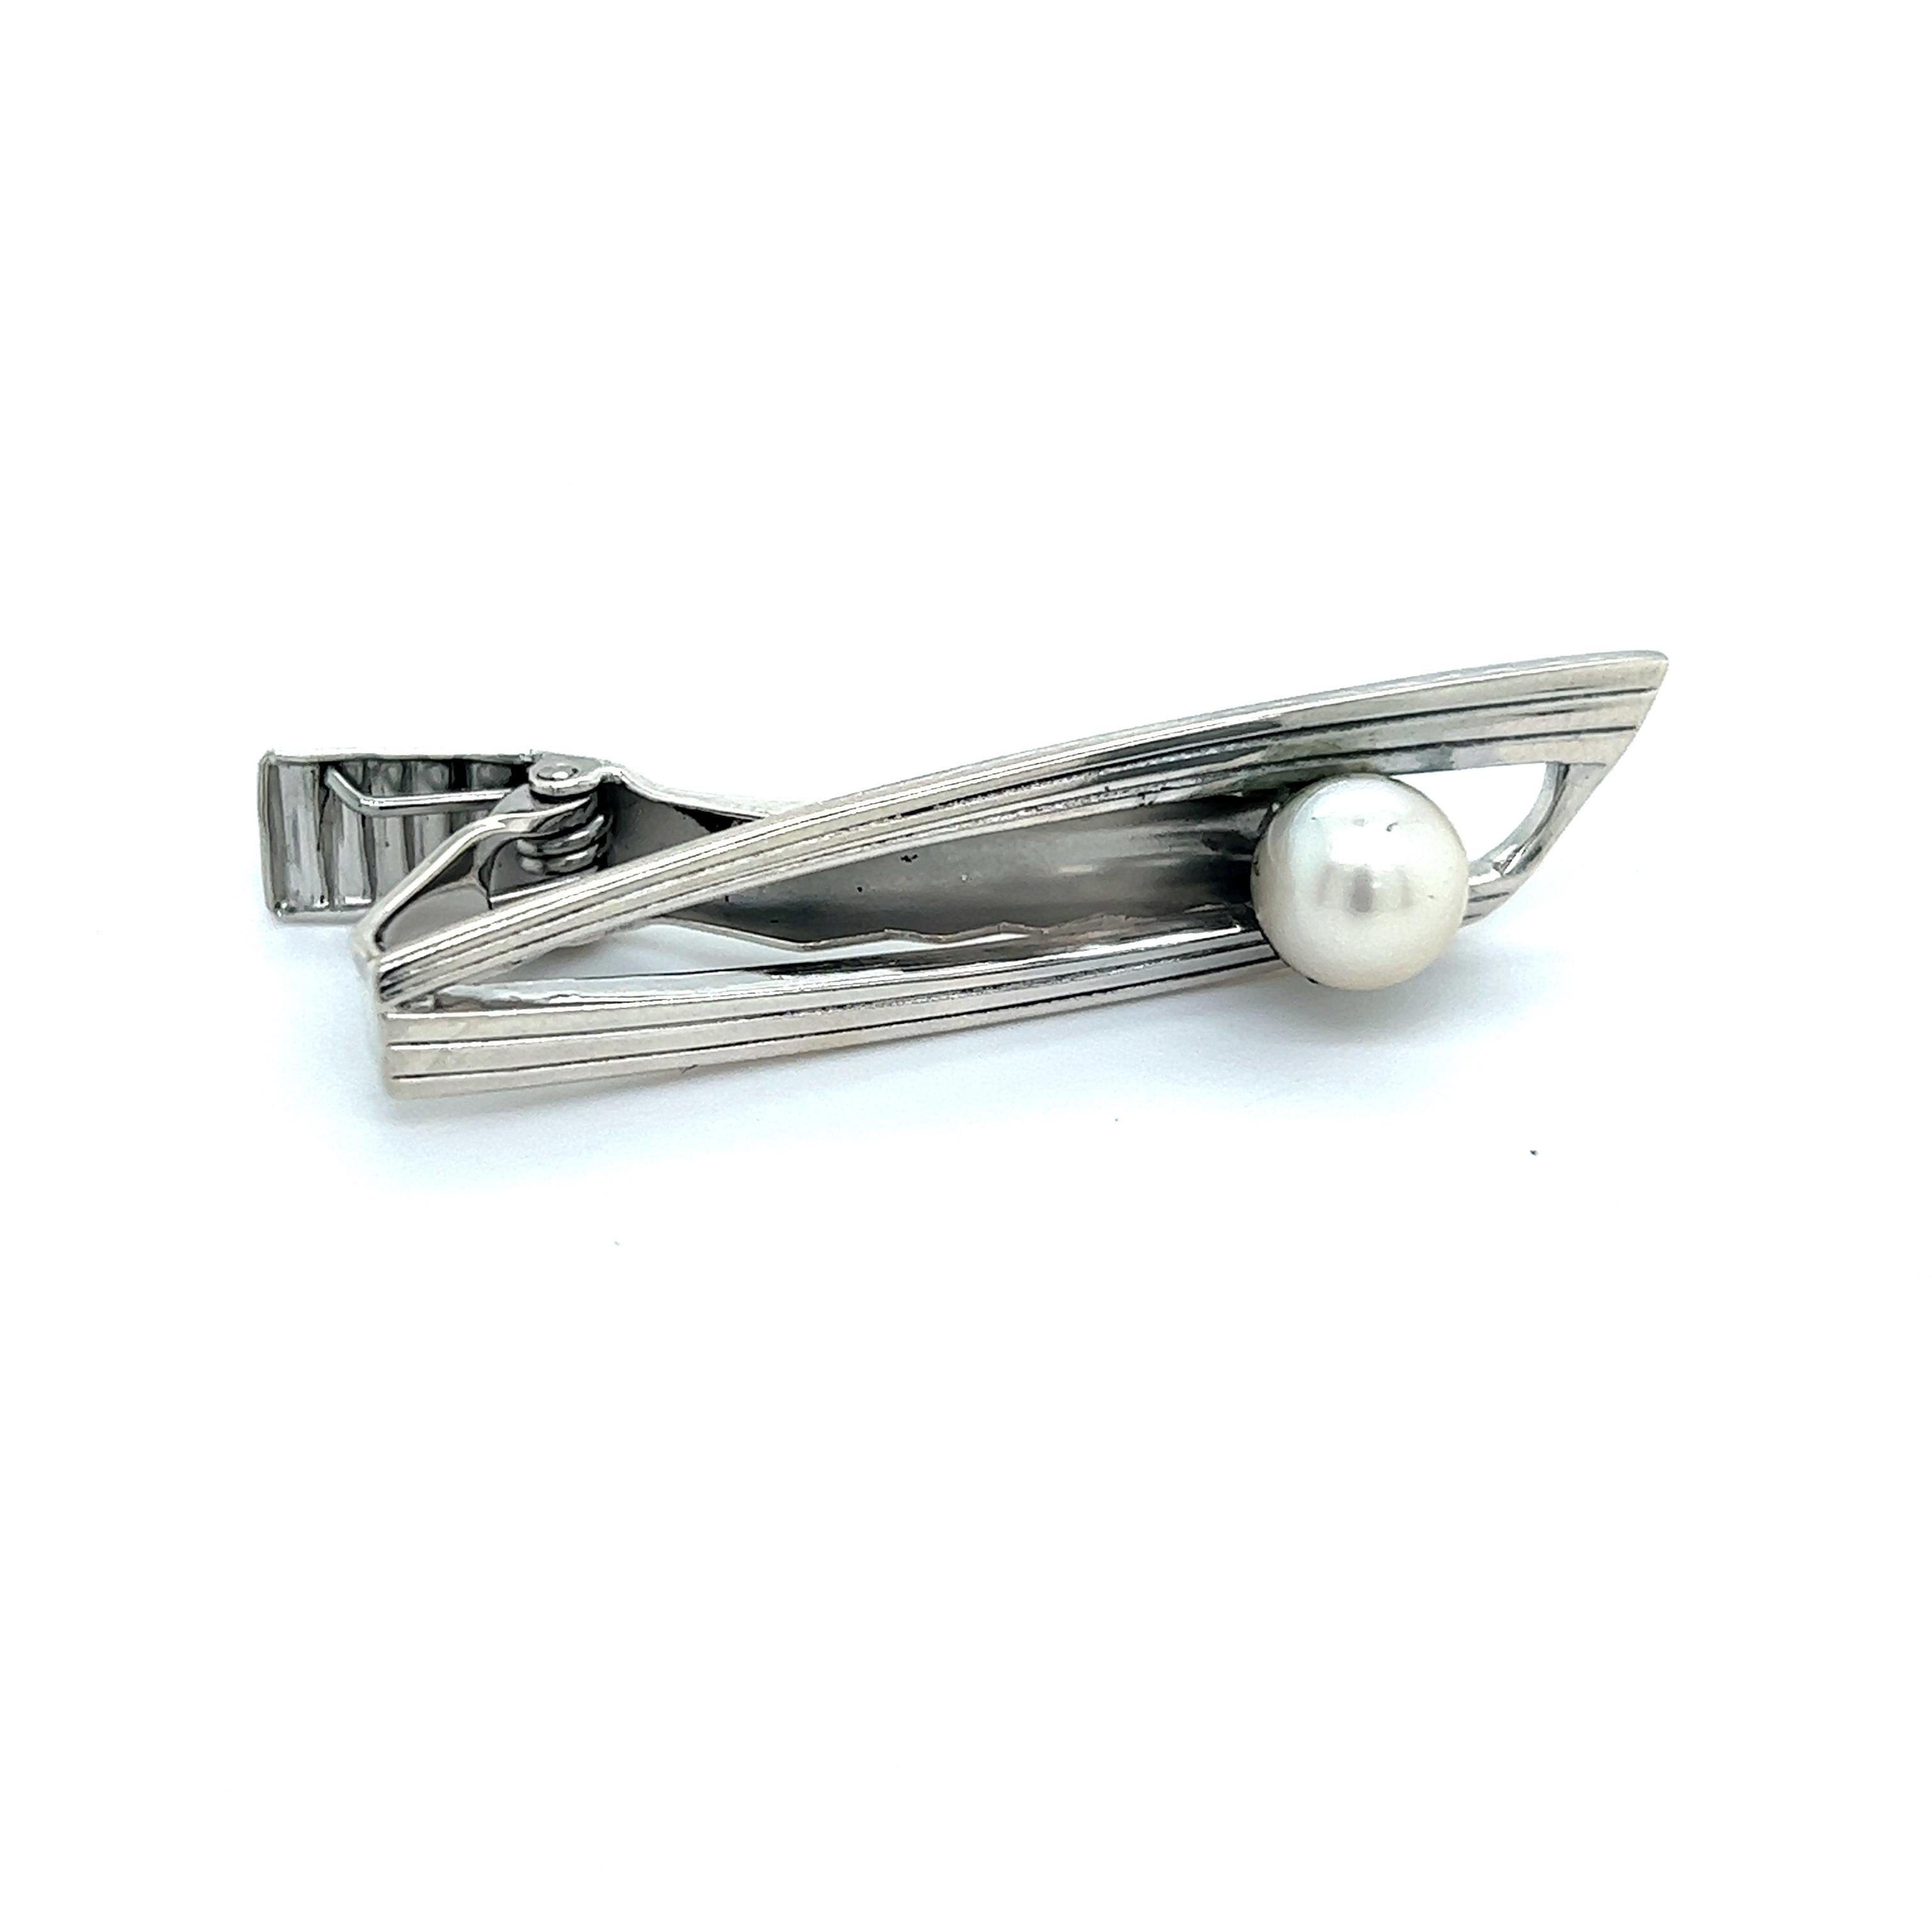 Mikimoto Estate Akoya Pearl Mens Tie Clip 7 mm Sterling Silver M316

This elegant Authentic Mikimoto Estate Akoya pearl tie clip is made of sterling silver and has 1 Akoya Cultured Pearl in size of 7 mm with a weight of 5.8 Grams.

TRUSTED SELLER